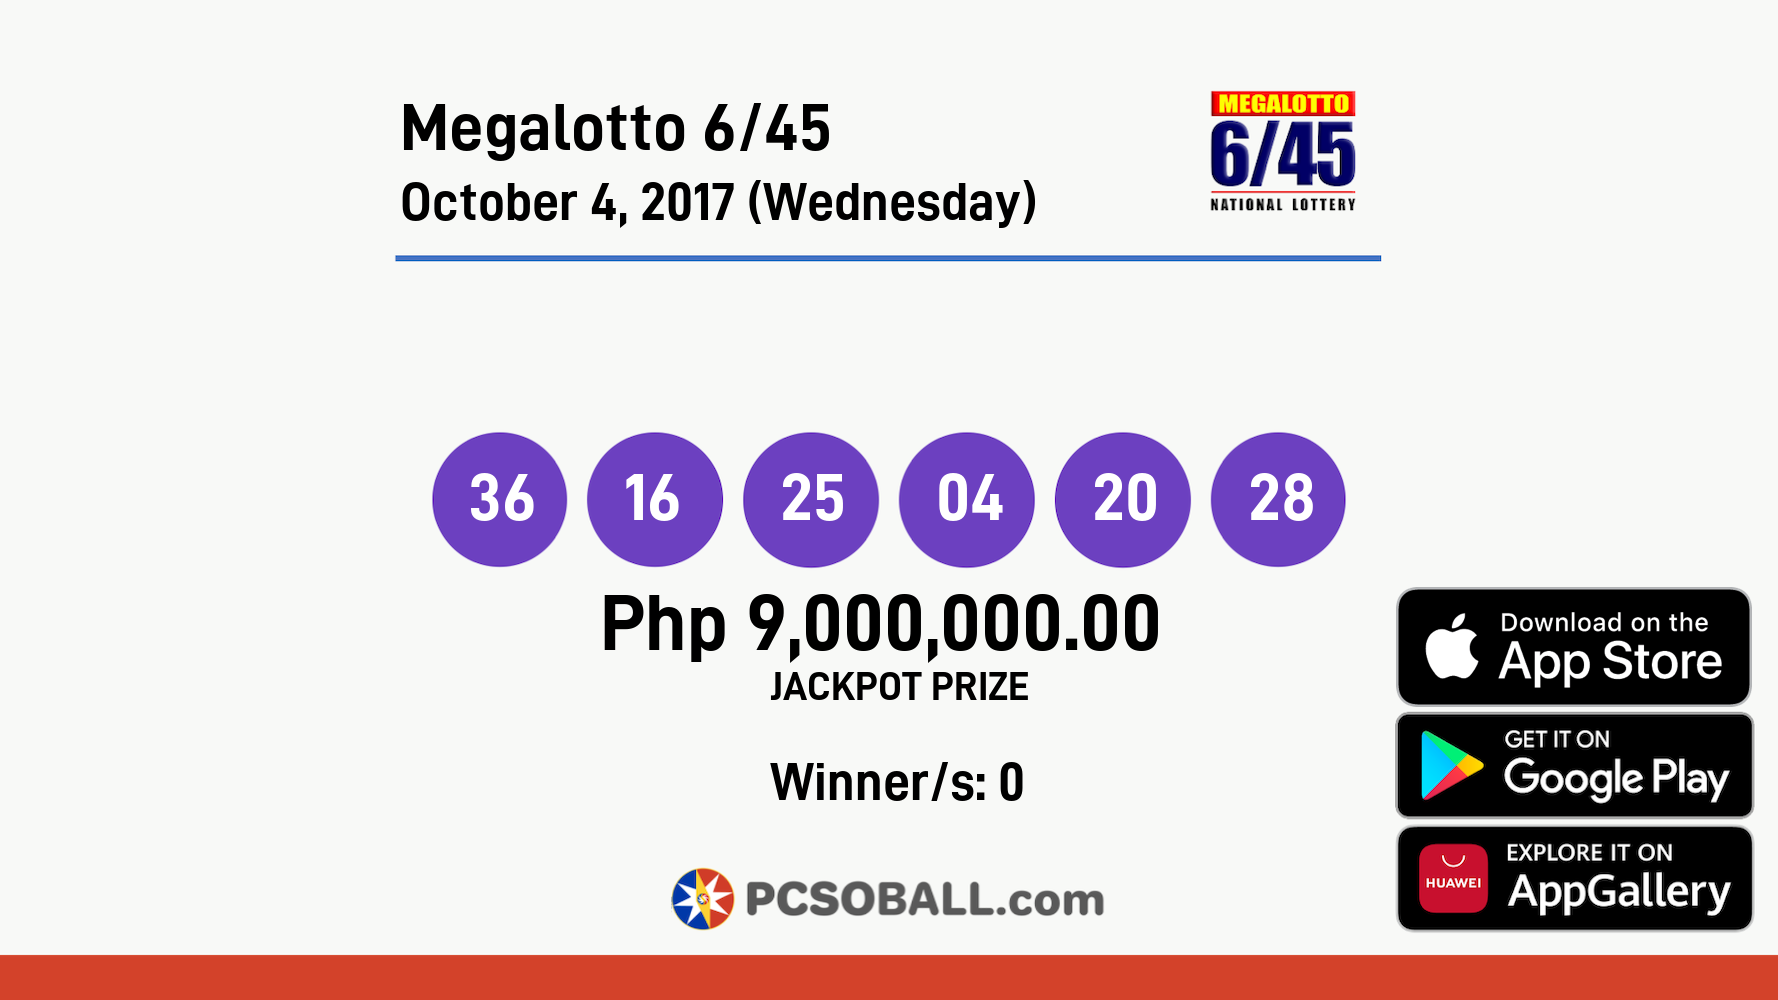 Megalotto 6/45 October 4, 2017 (Wednesday) Result